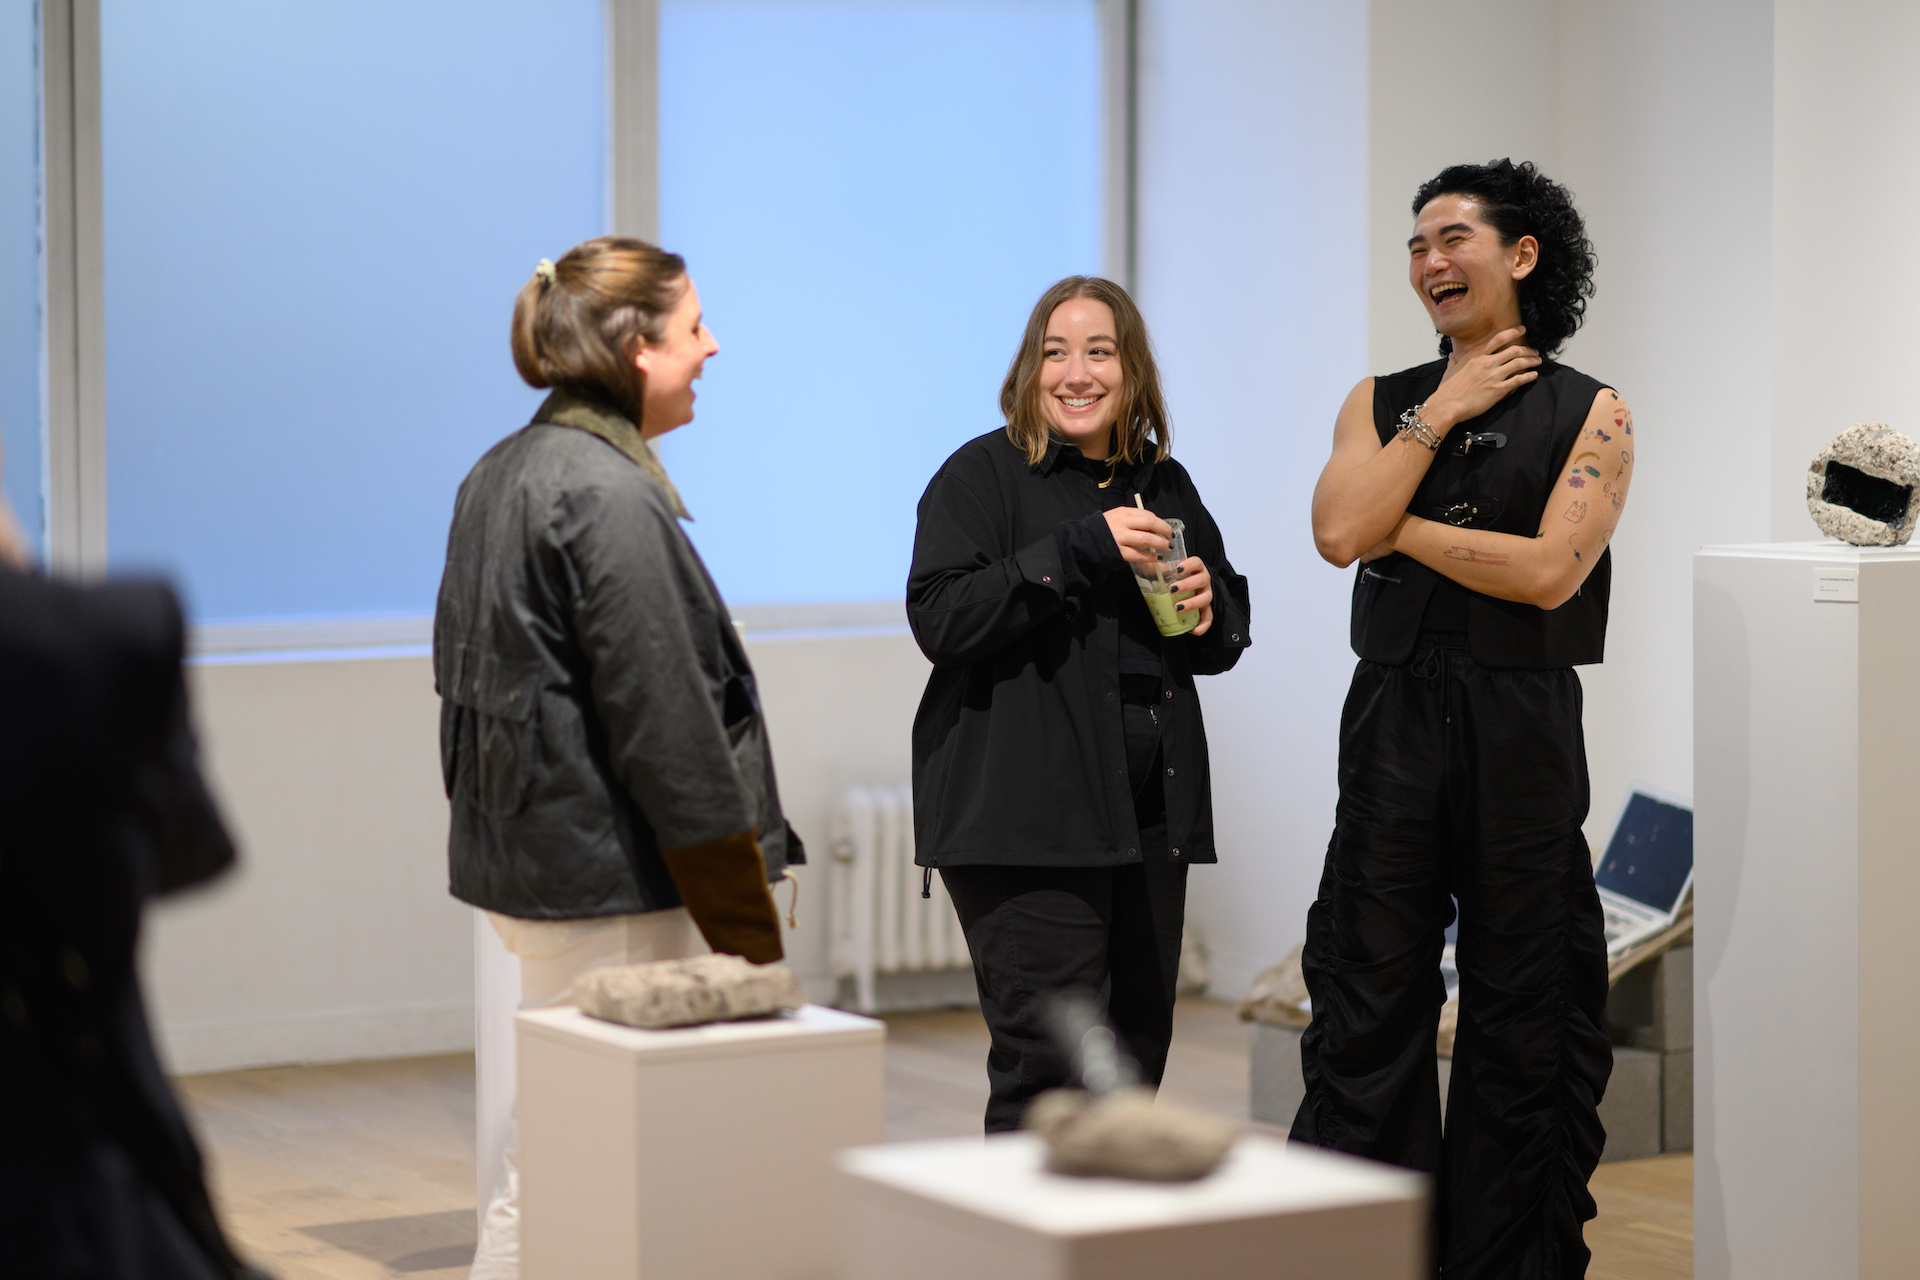 Blair Simmons and two guests standing in her new solo exhibition, “Archive of Digital Portraits Cast in Concrete”.